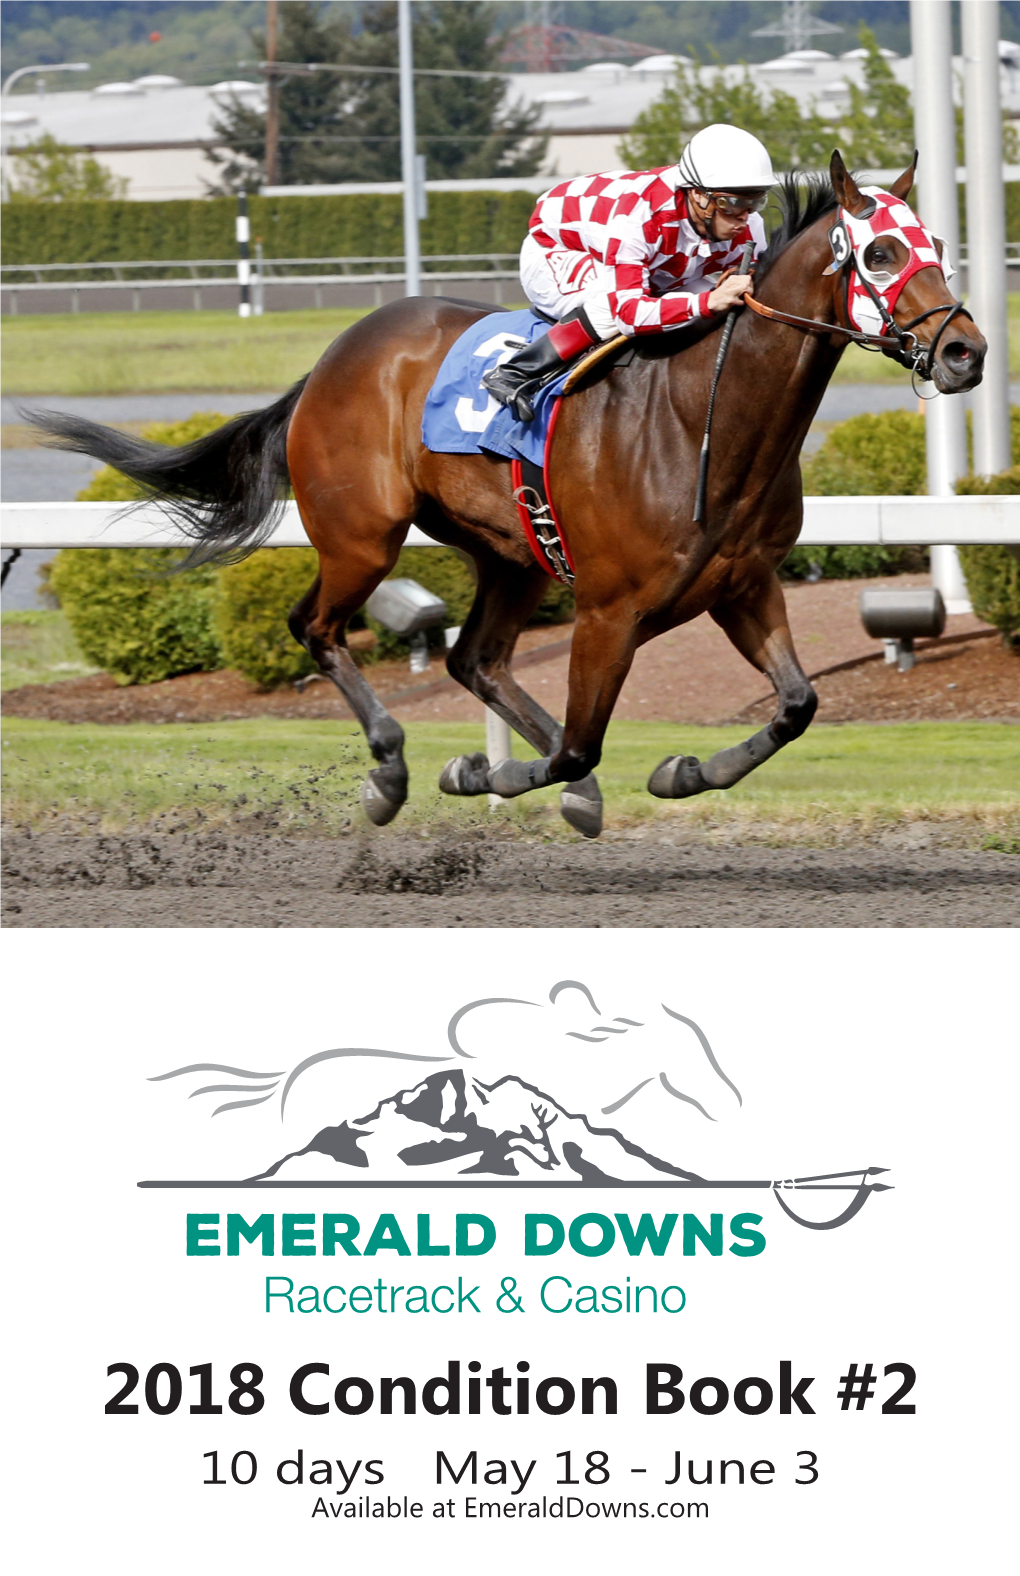 2018 Condition Book #2 10 Days May 18 - June 3 Available at Emeralddowns.Com #1 in SAME DAY SERVICE